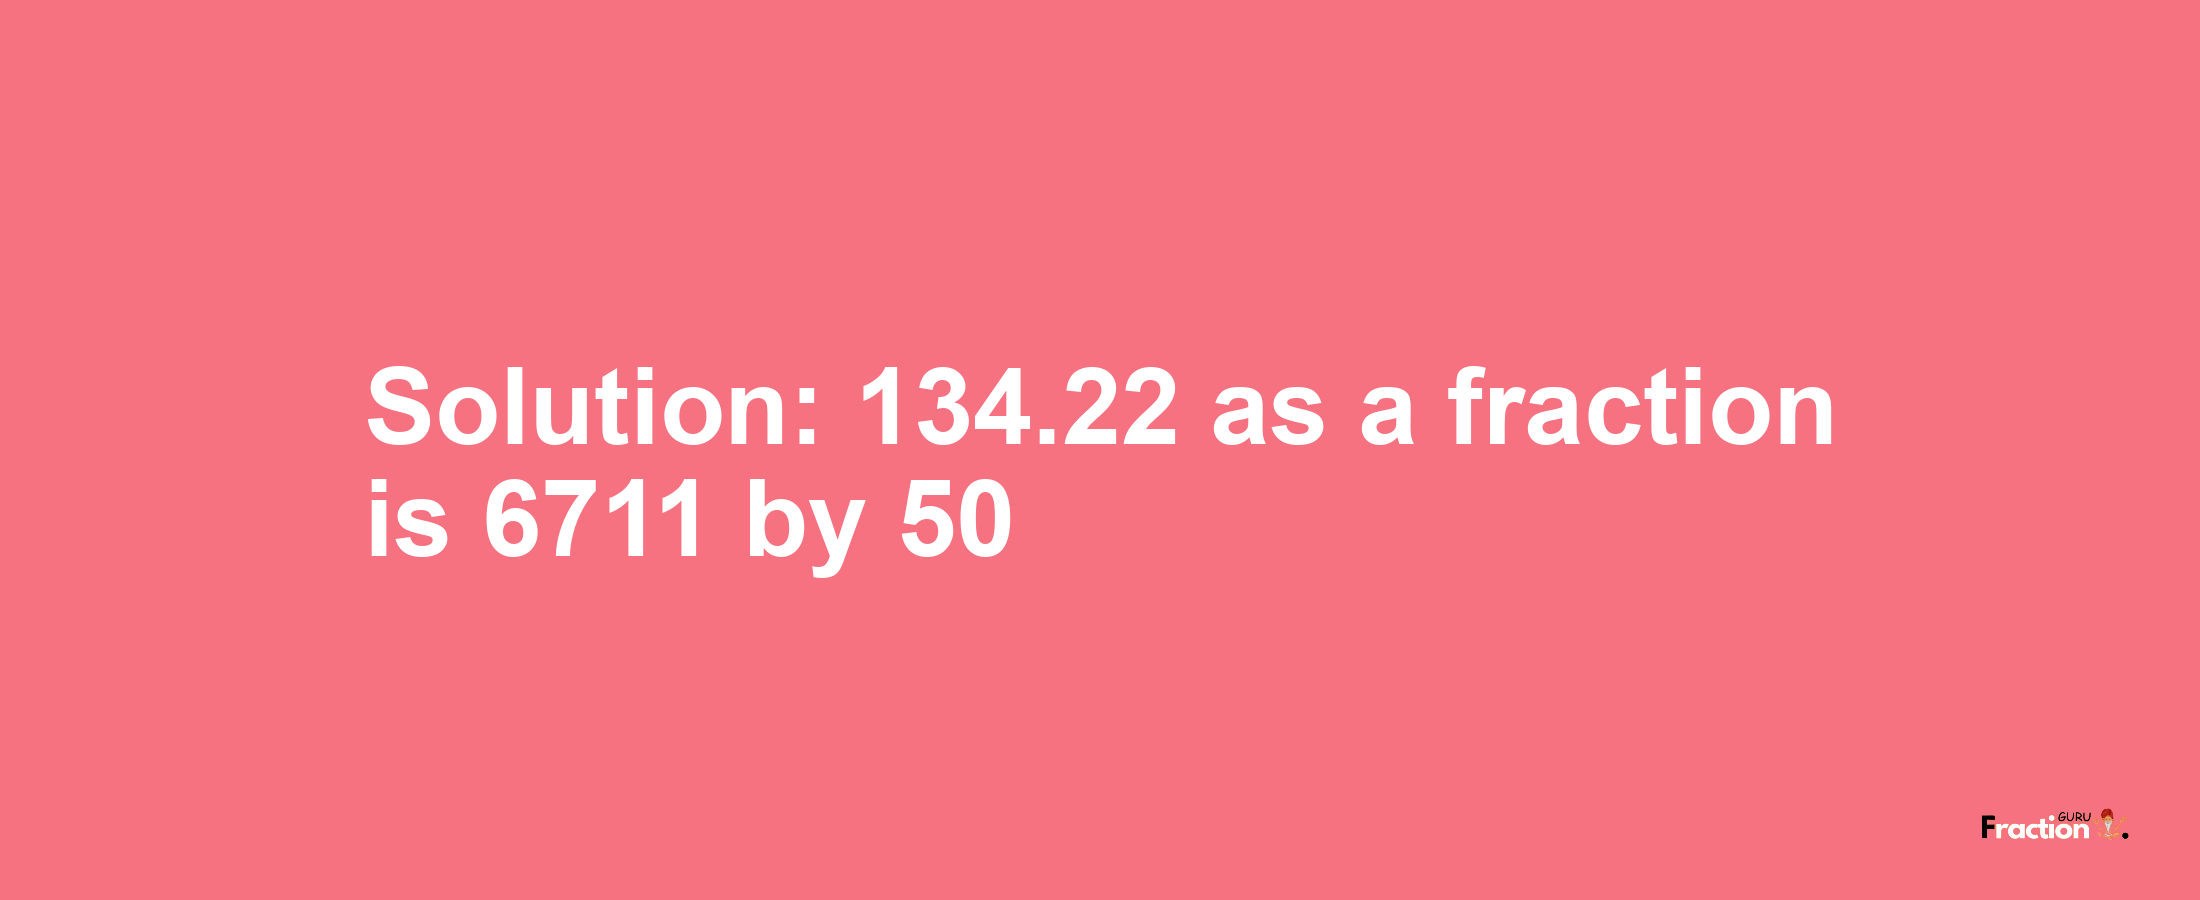 Solution:134.22 as a fraction is 6711/50